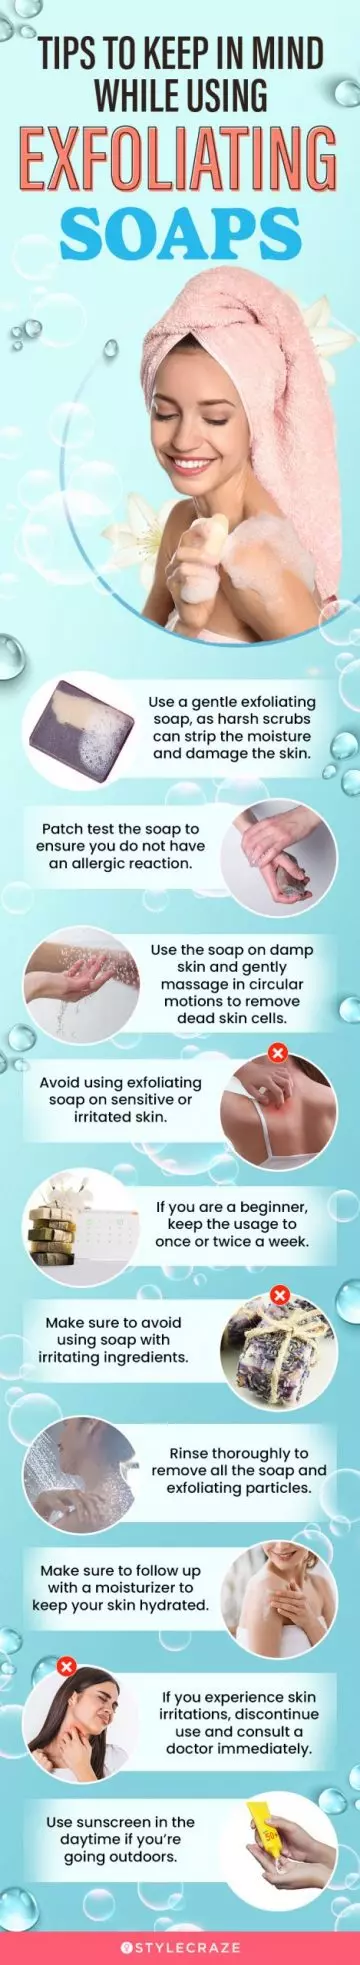 Tips To Keep In Mind While Using Exfoliating Soaps (infographic)